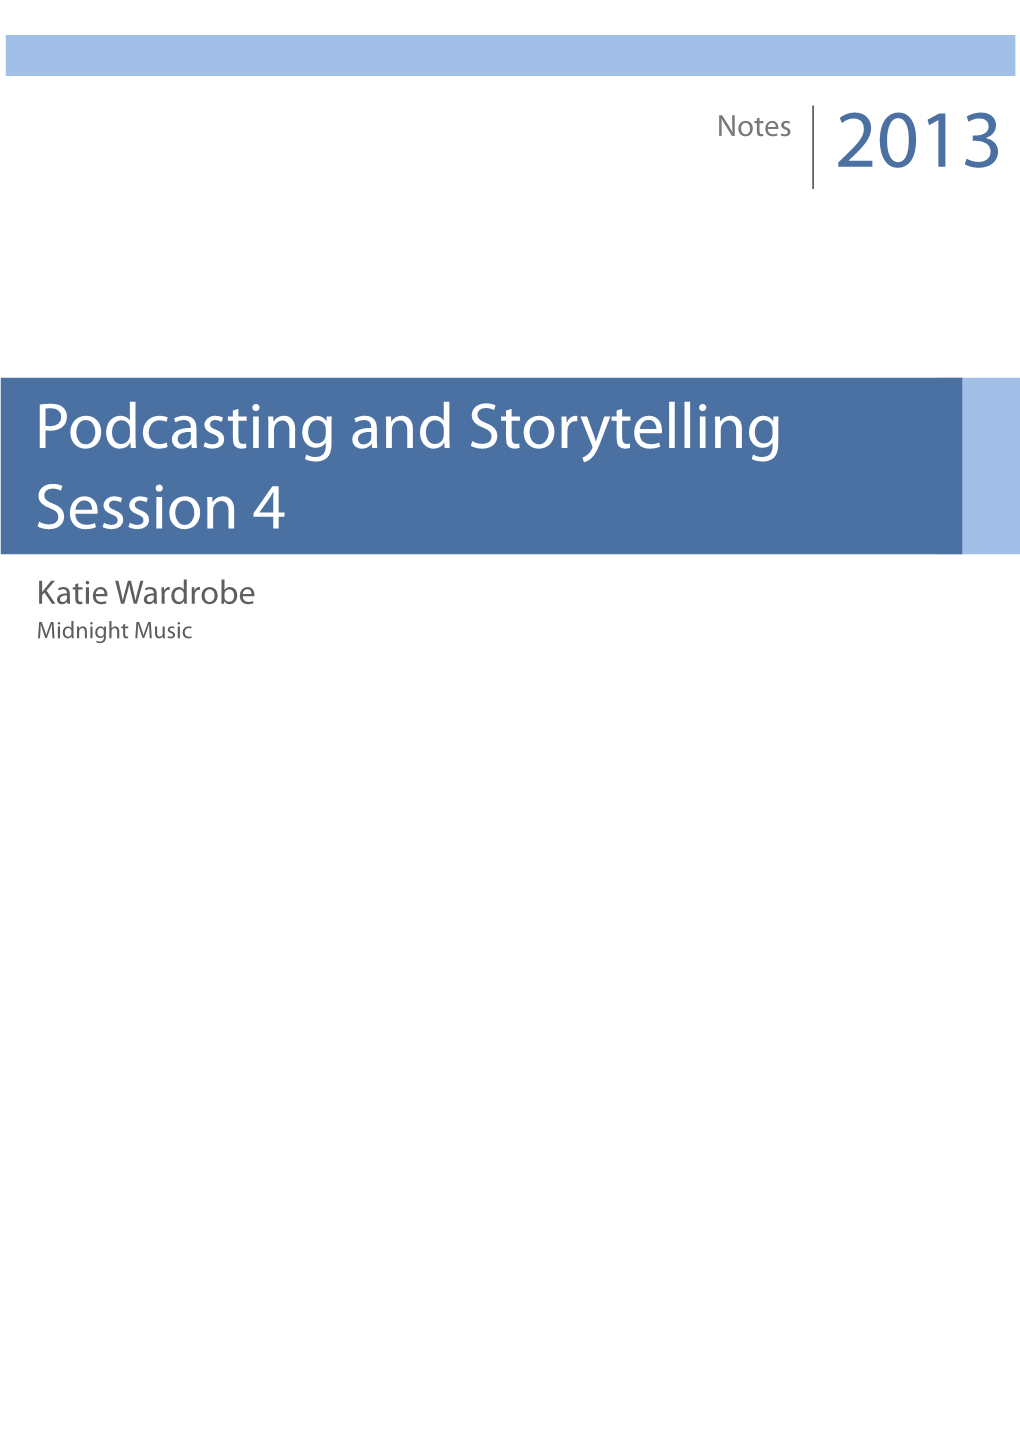 Podcasting and Storytelling Session 4 Katie Wardrobe Midnight Music Podcasting: Curriculum Ideas 3